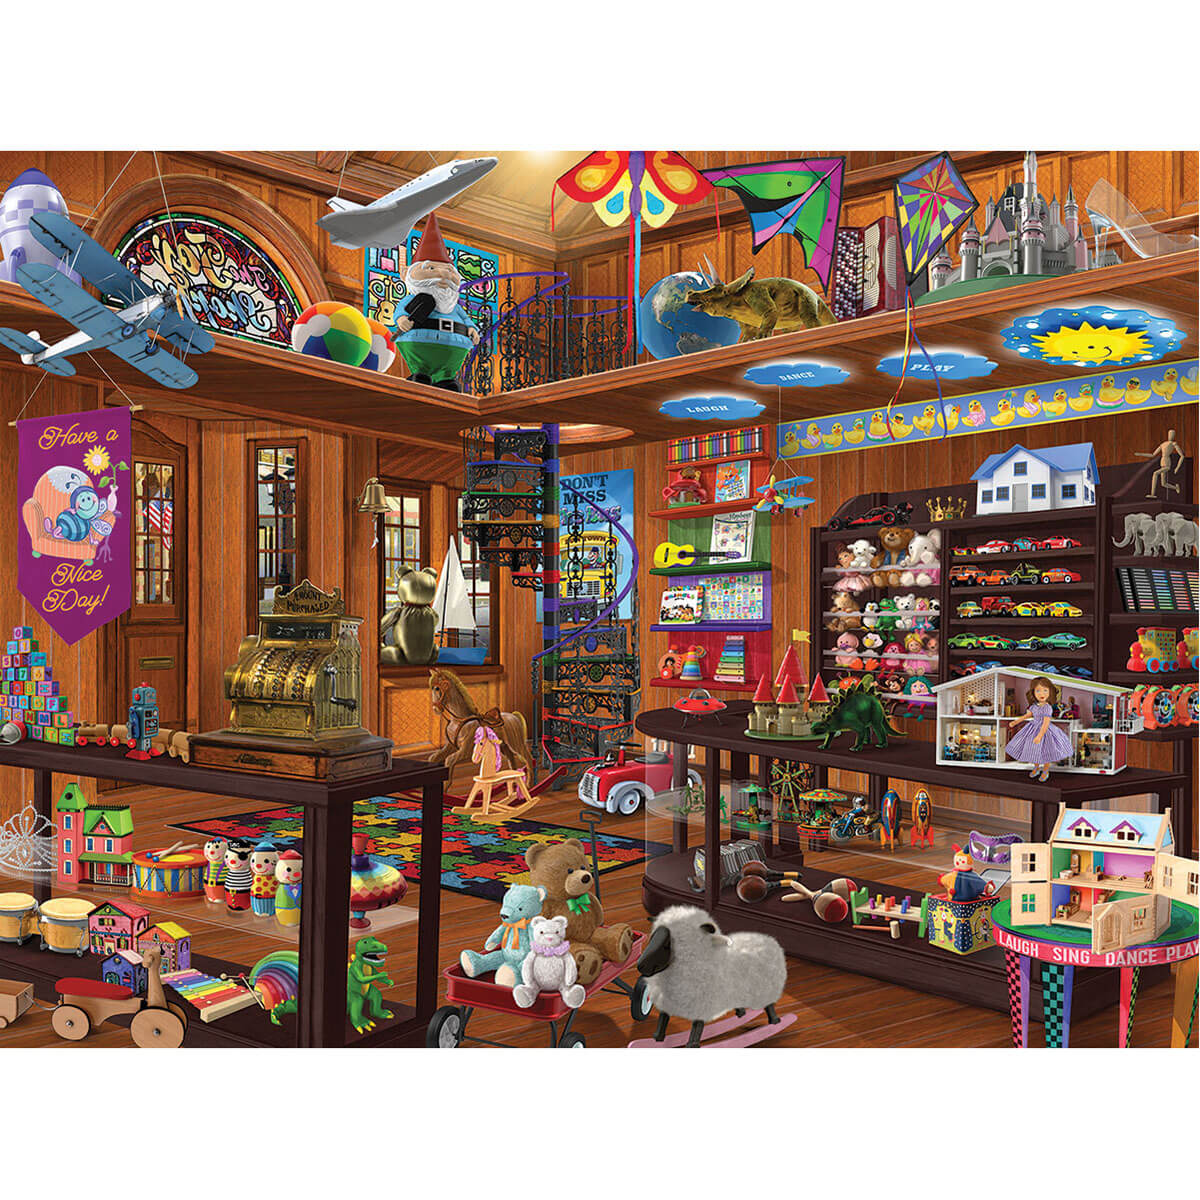 White Mountain Puzzles Toy Shop Seek & Find 1000 Piece Jigsaw Puzzle